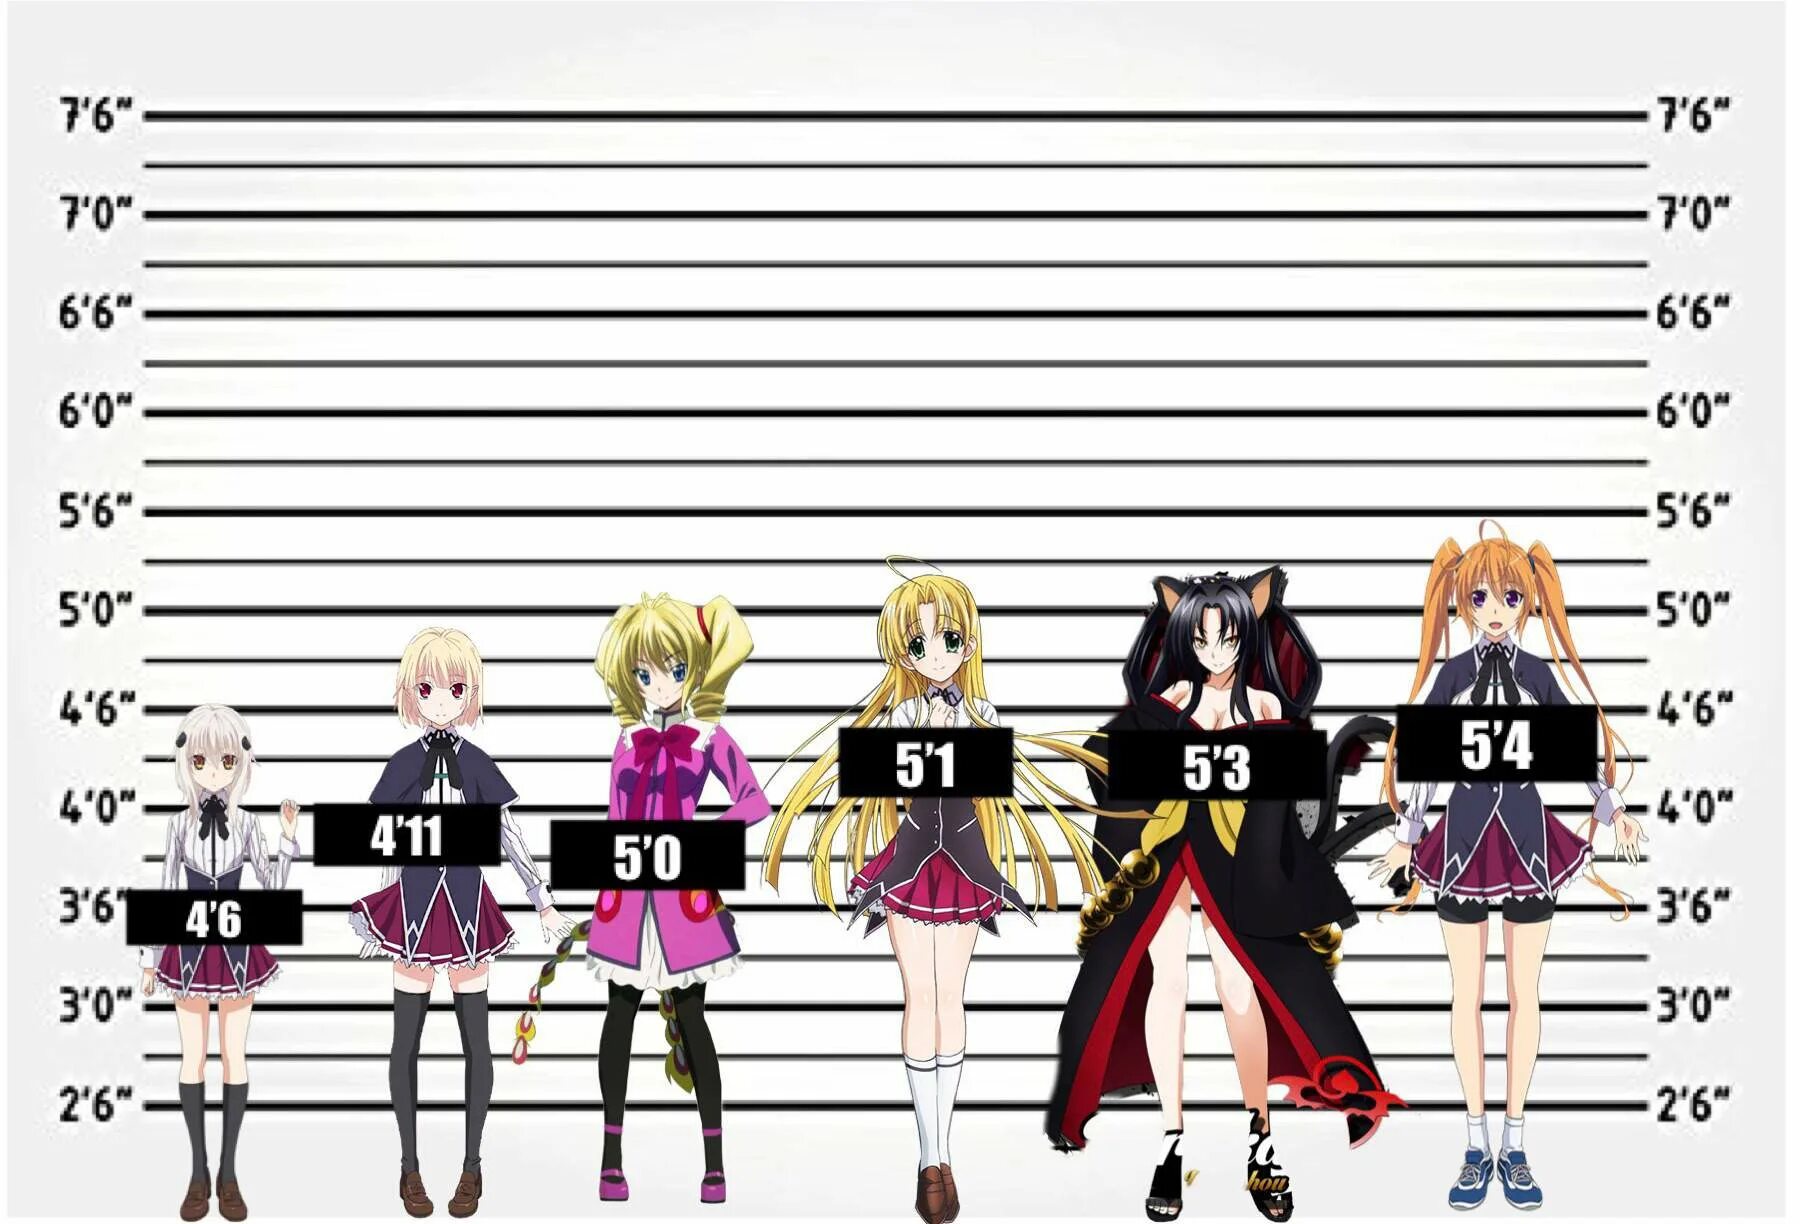 Character height Chart.